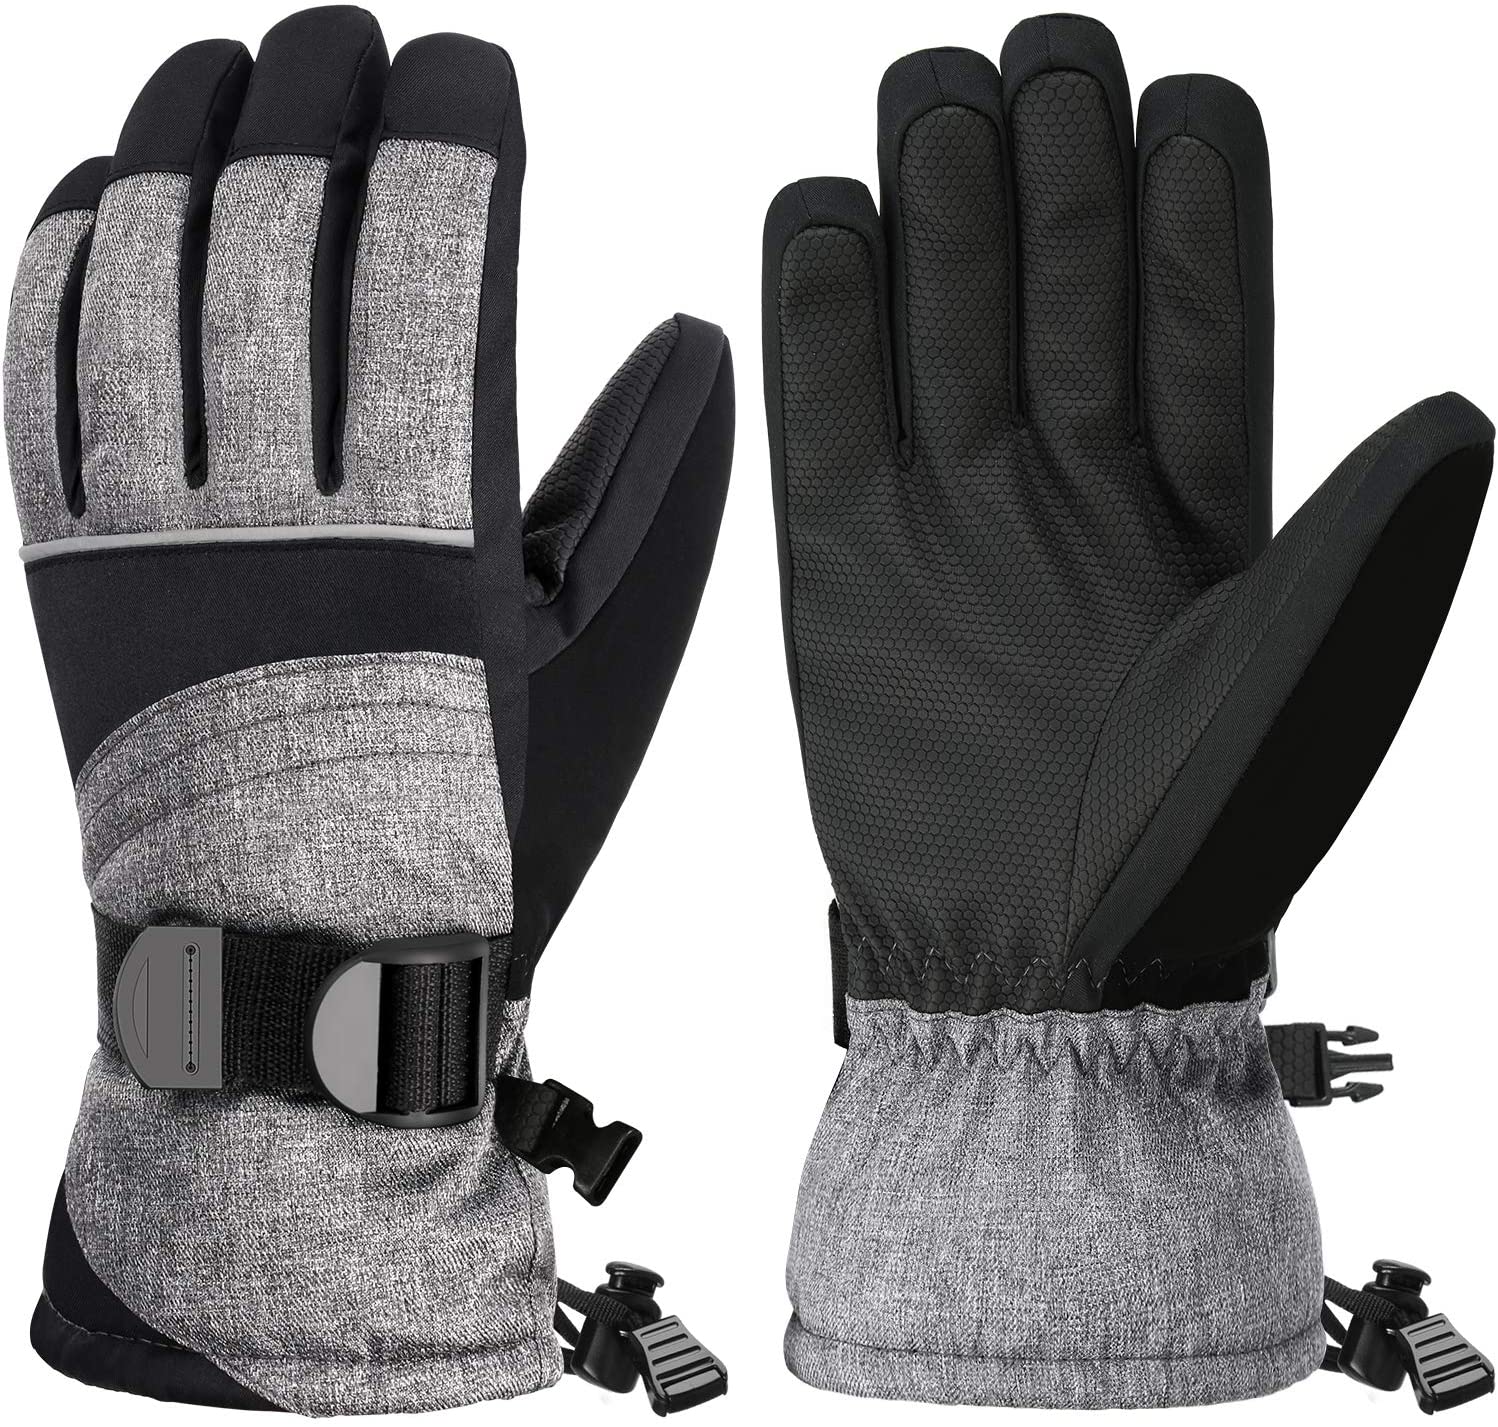 WINTER GLOVES WOMEN'S SUMMON BLACK AND WHITE WATERPROOF AND BREATHABLE SKI 